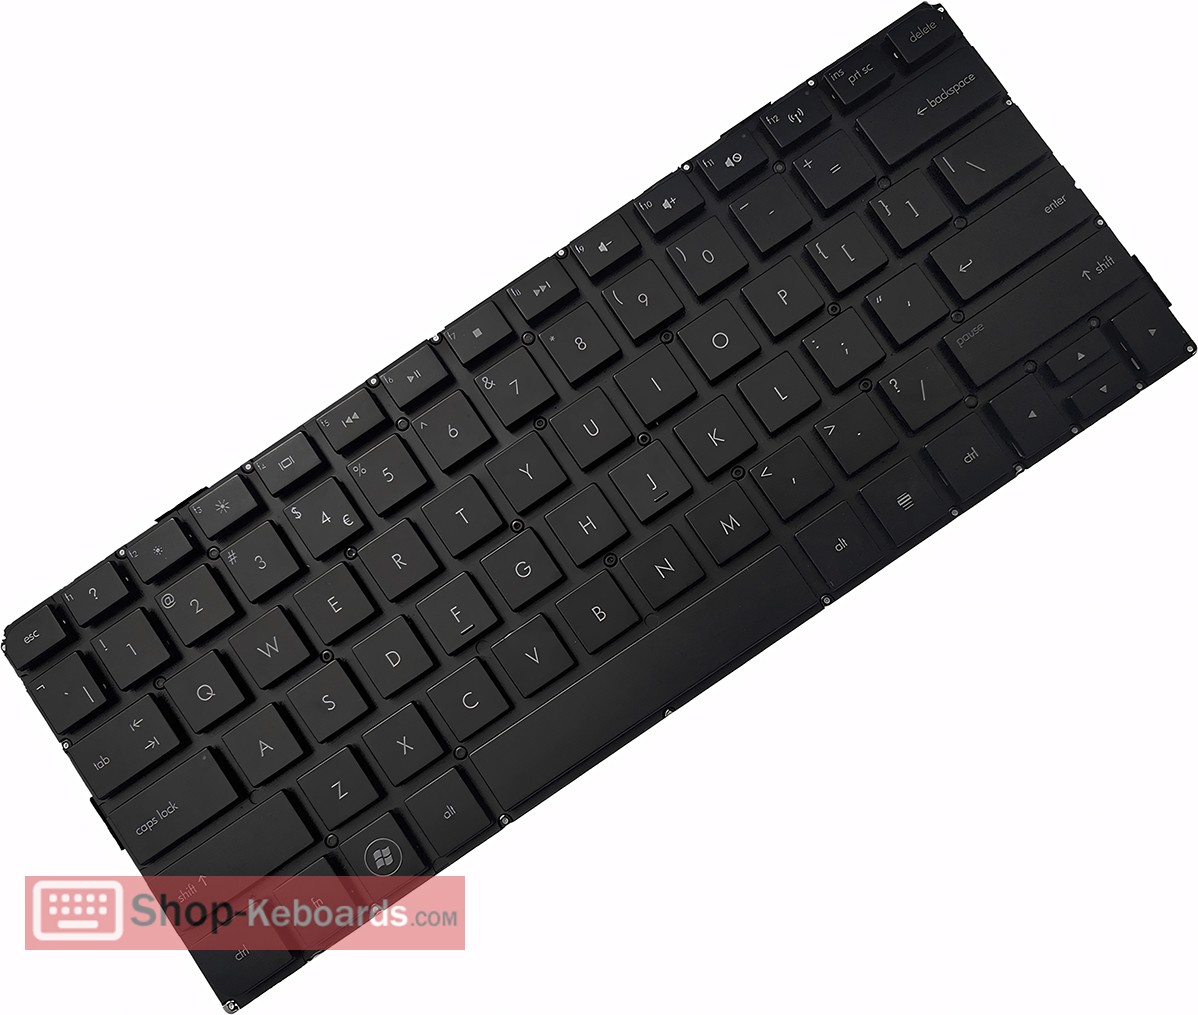 HP ENVY 13-1090 SERIES Keyboard replacement